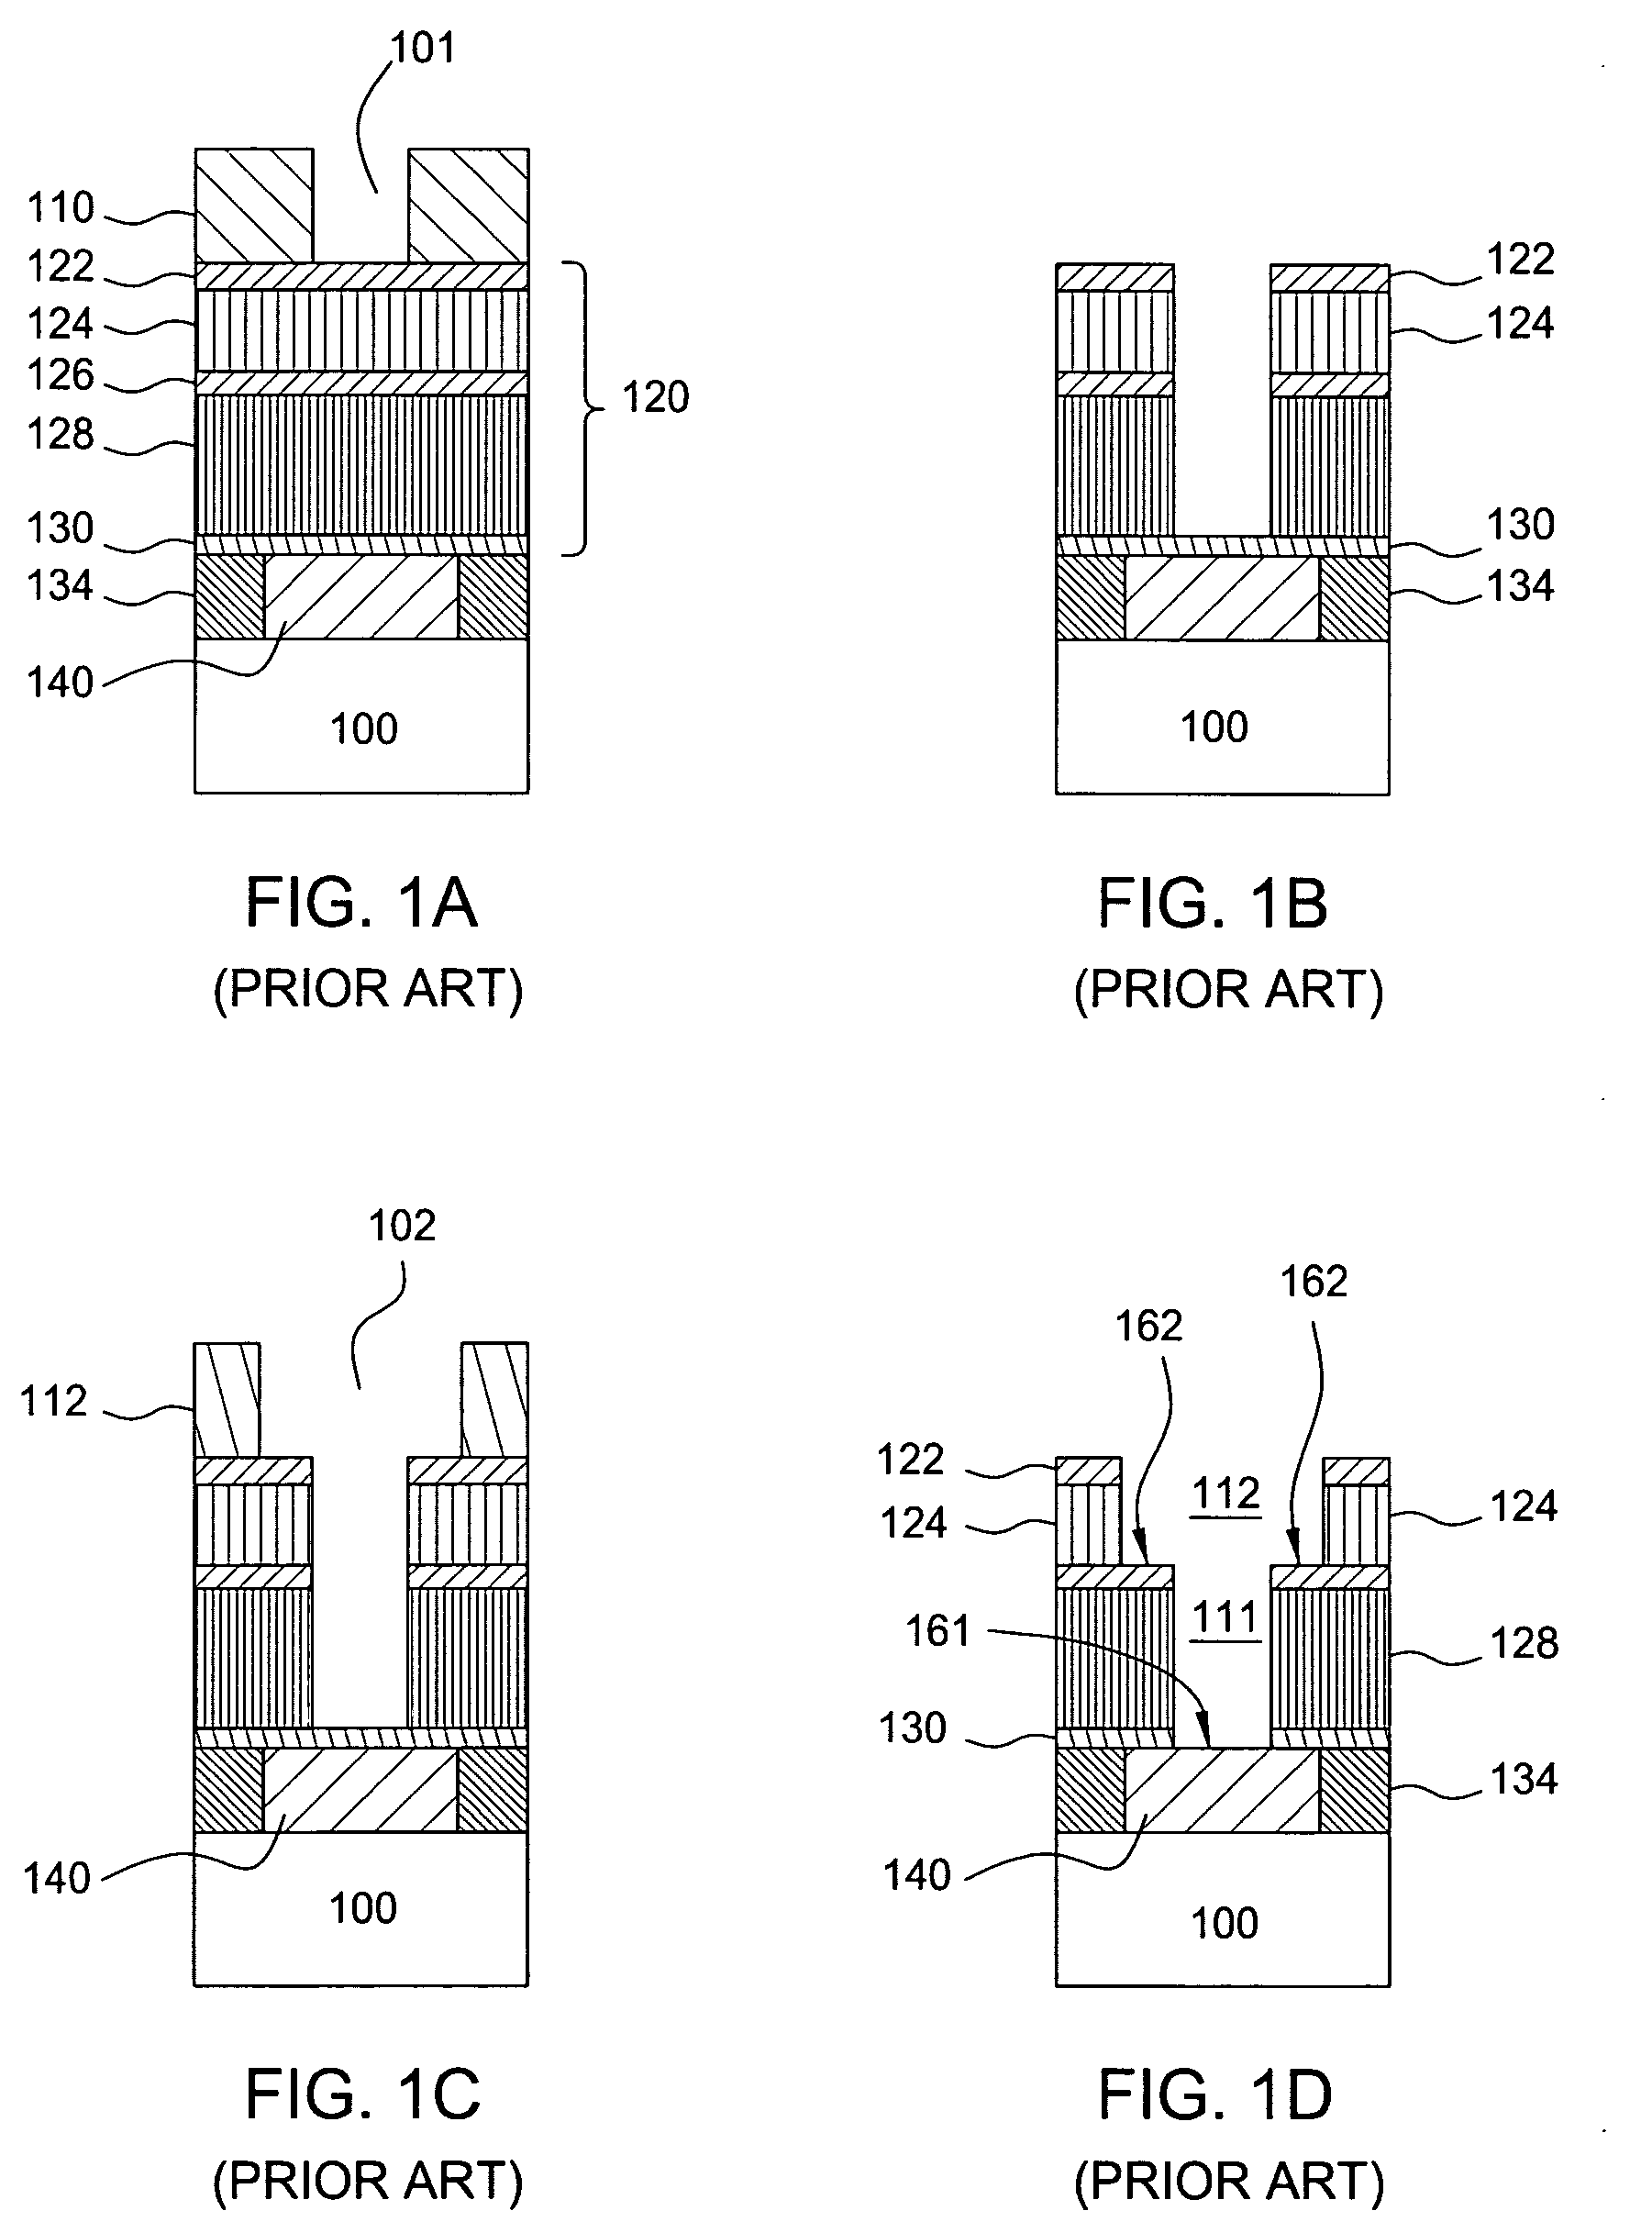 Dual damascene fabrication with low k materials